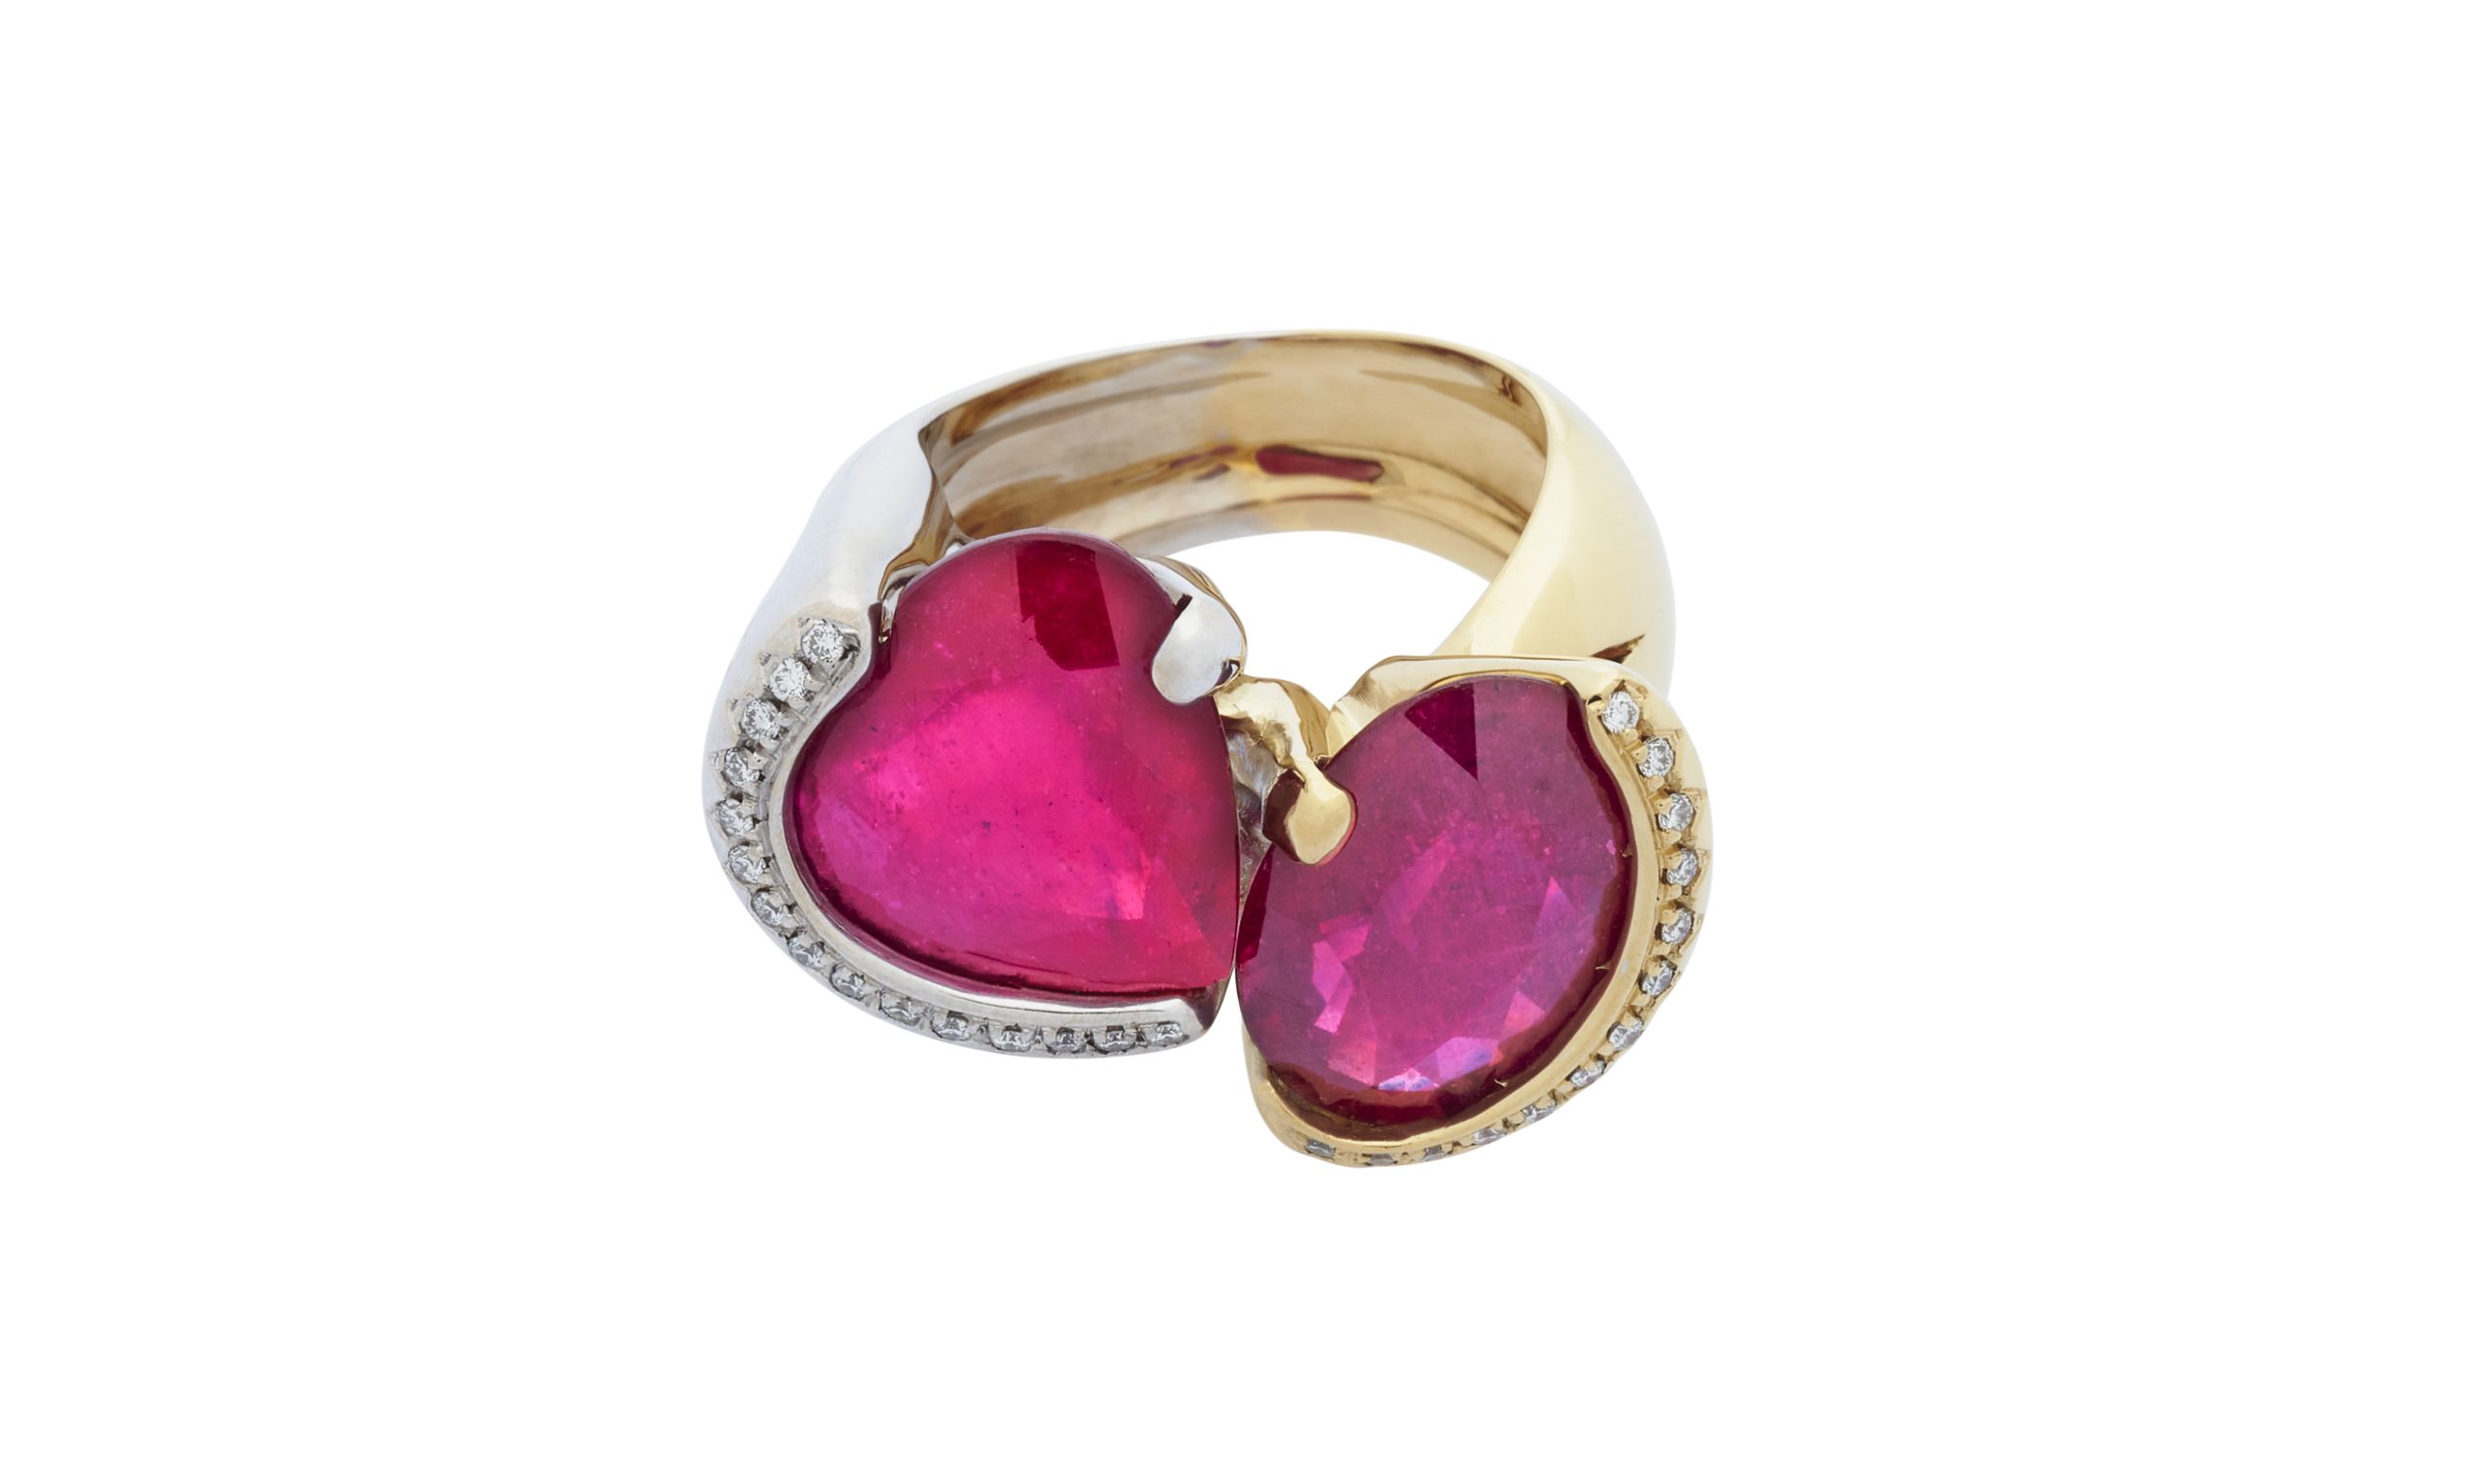 Ring MON AMOUR. Yellow and White Gold with Rubies and Diamonds.